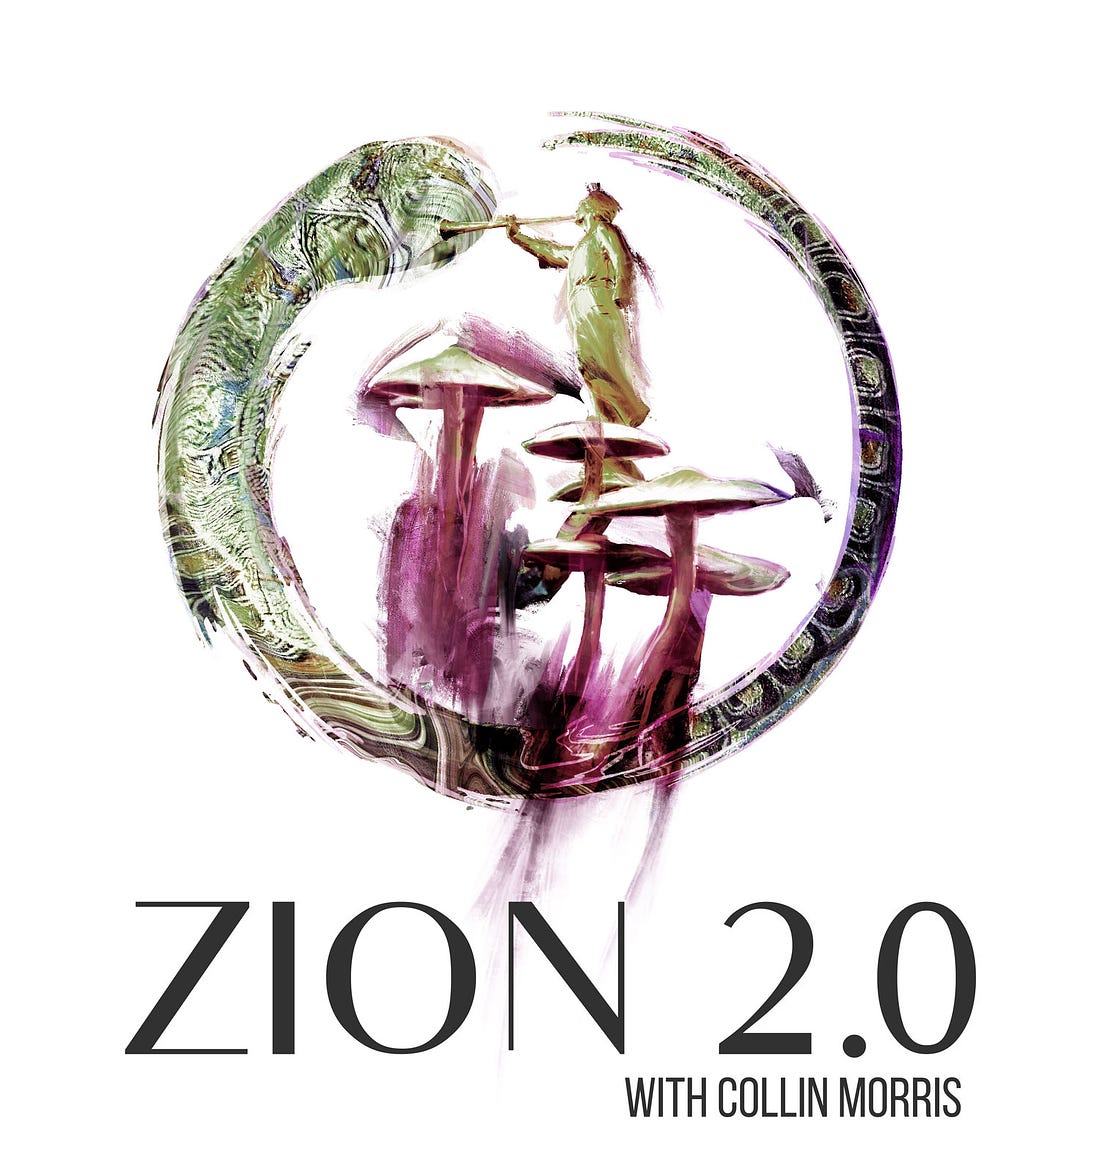 ZION 2.0 with Collin Morris